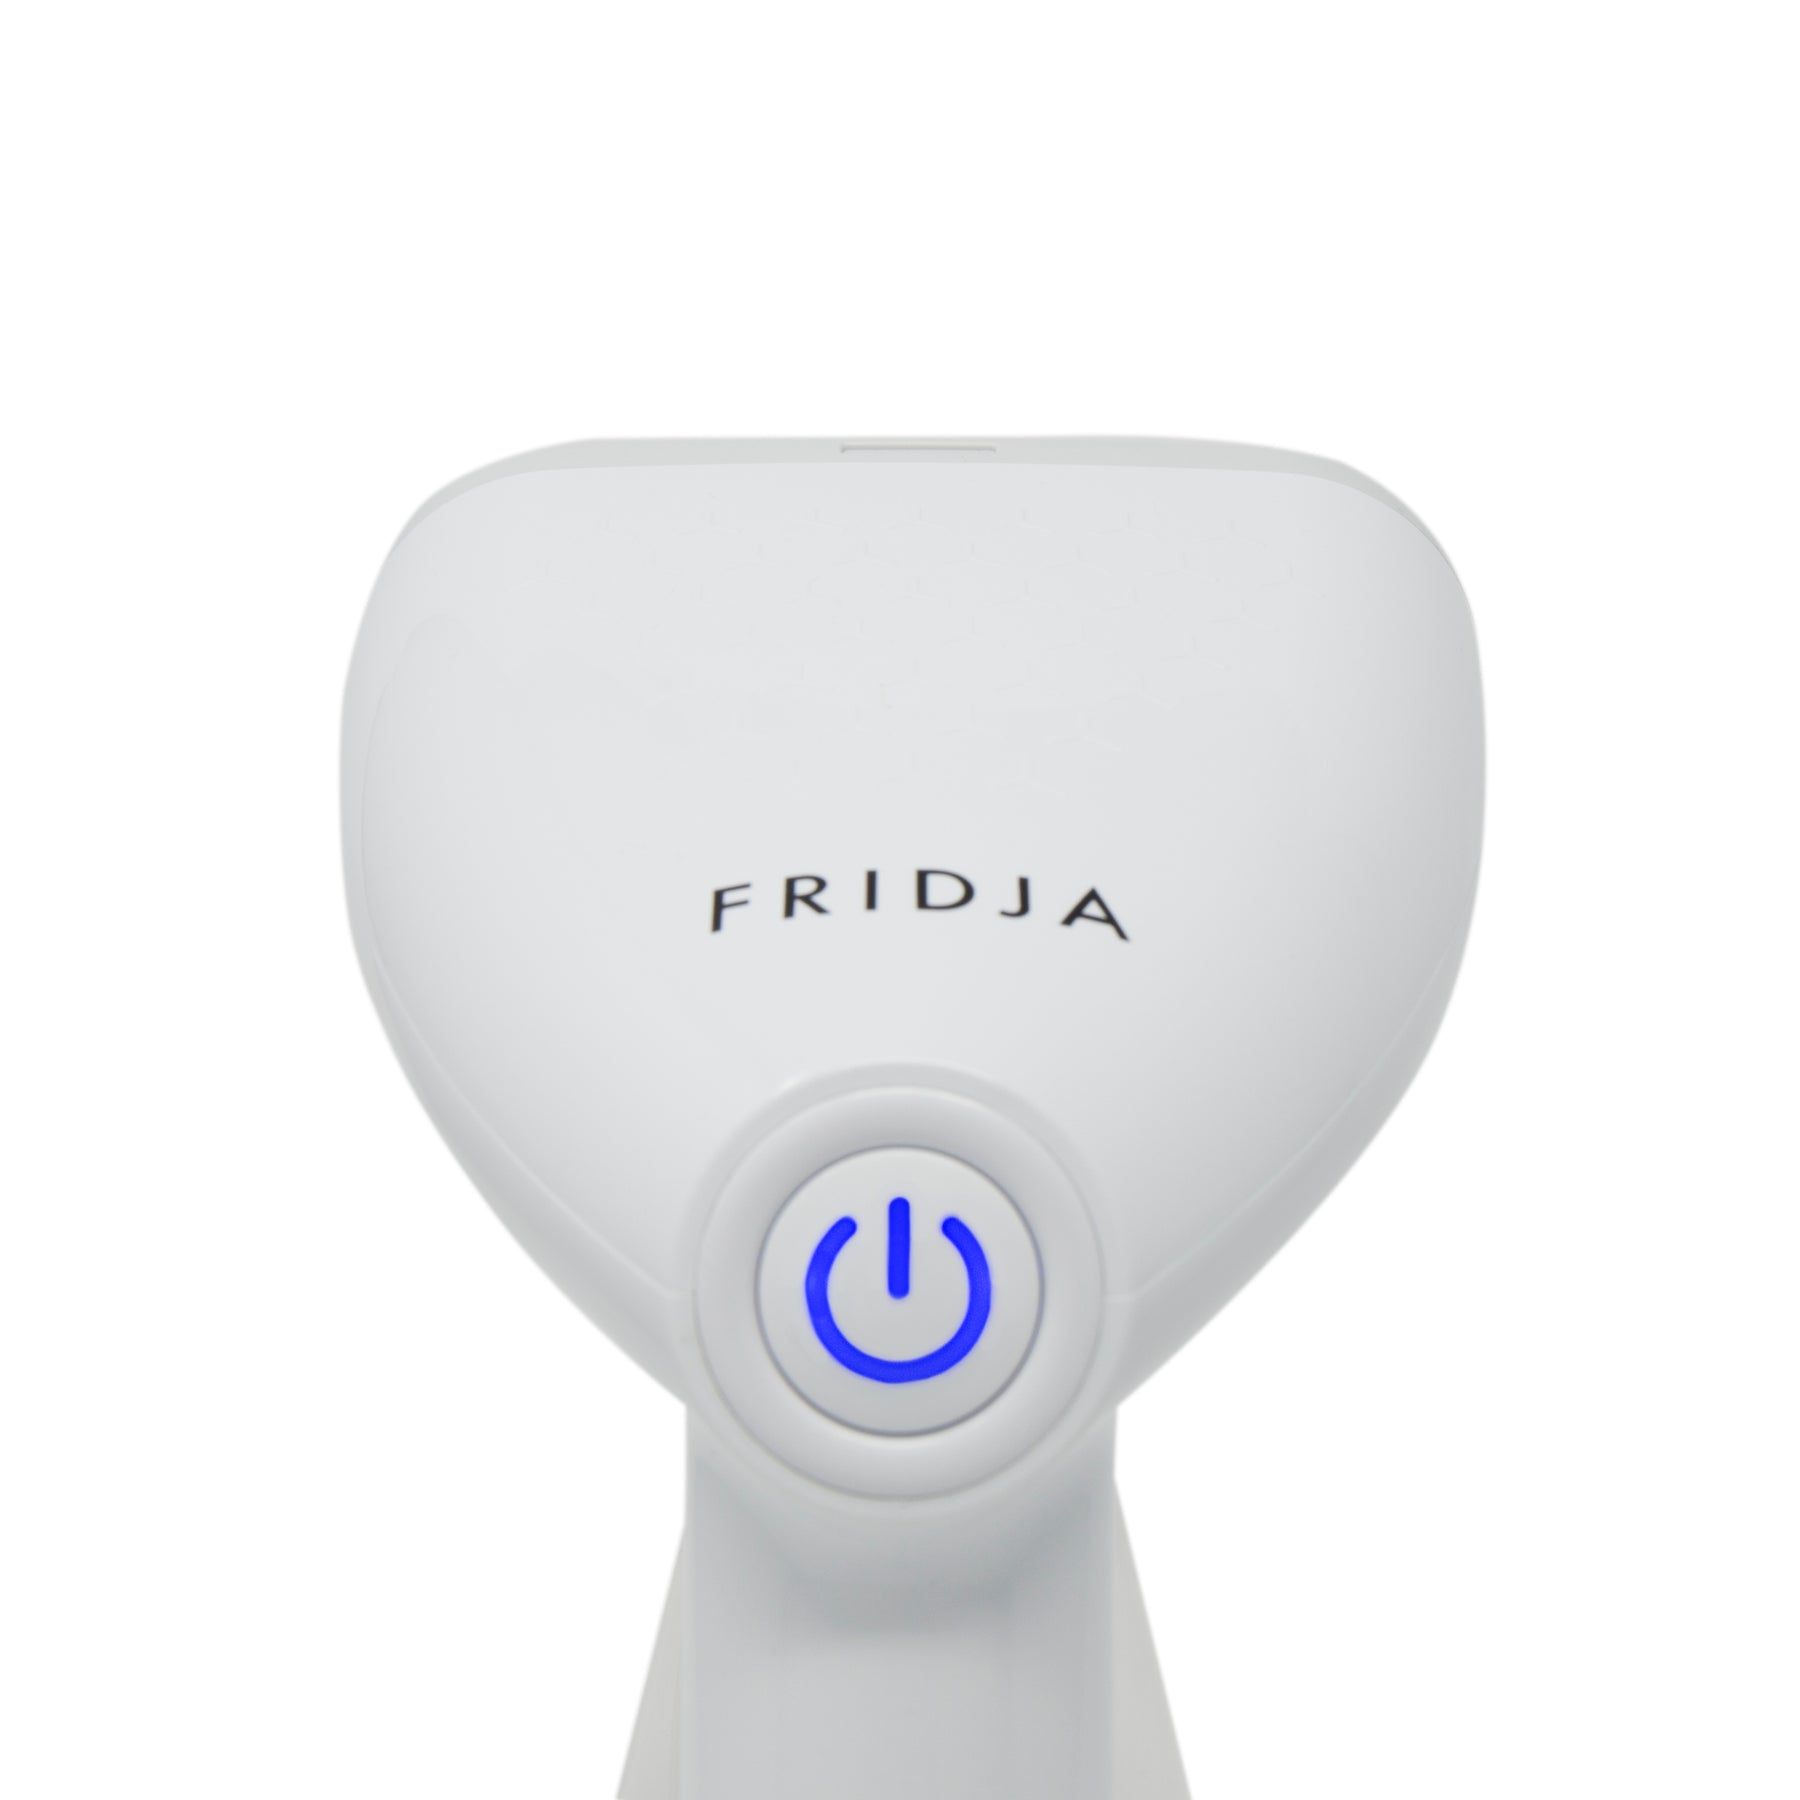 Top view of the Fridja handheld clothes steamer in white with brand name and blue power button